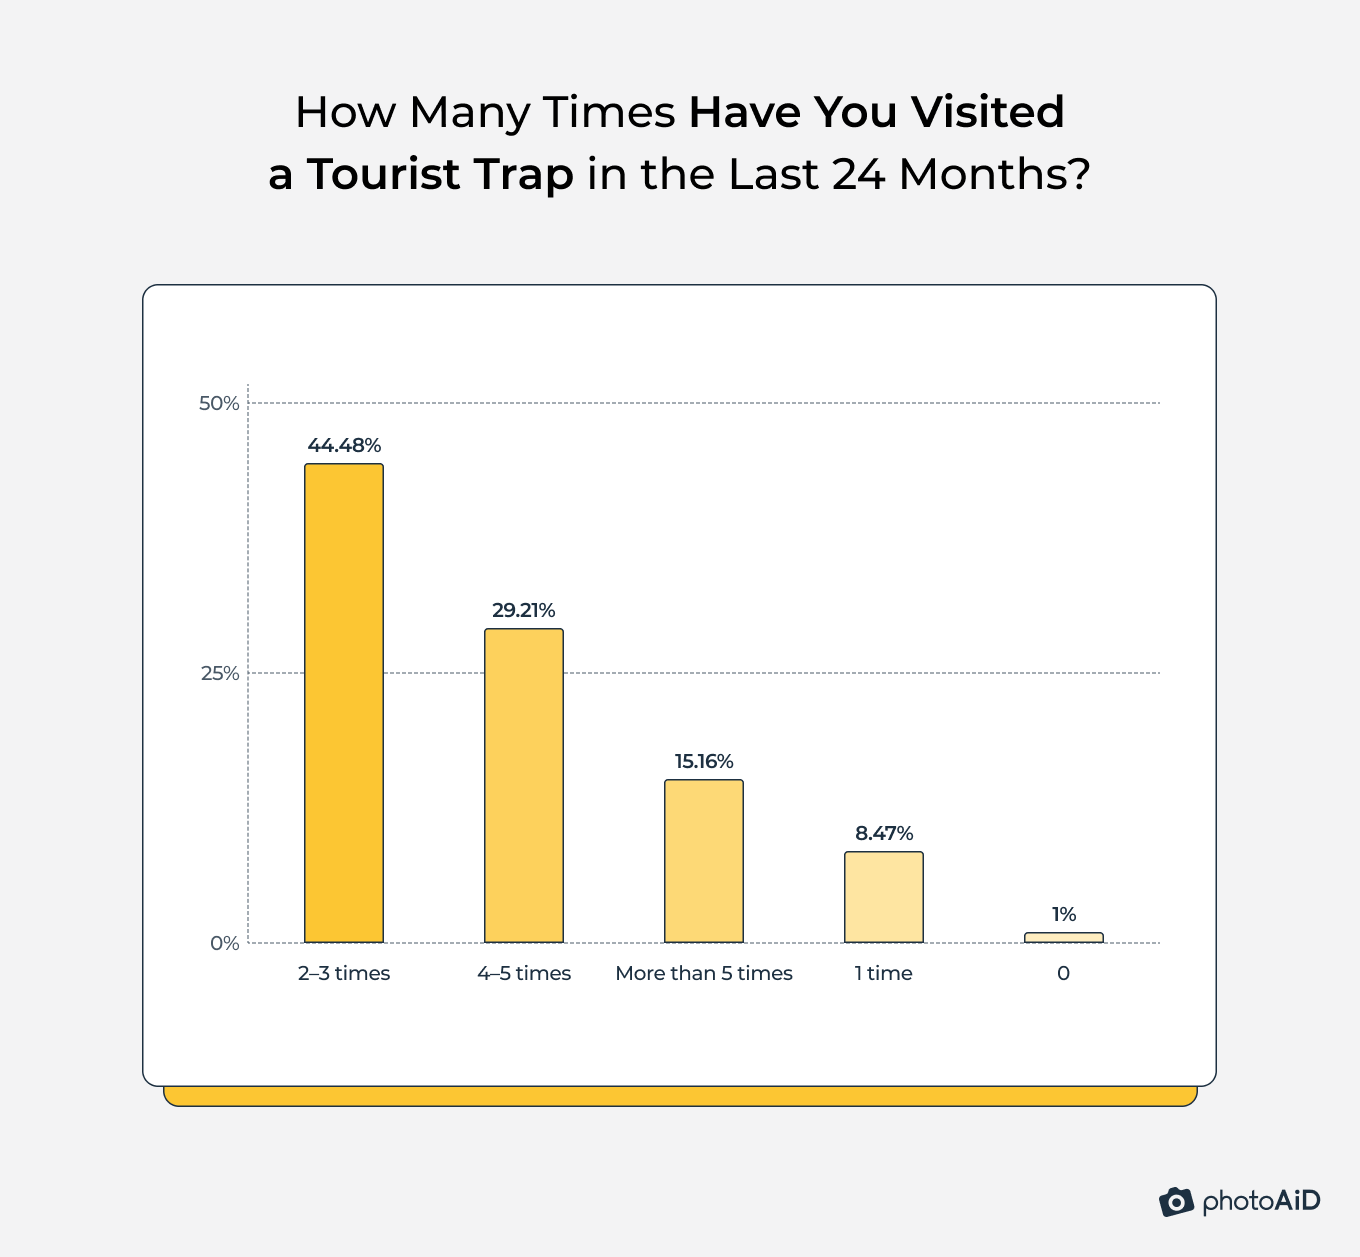 Most travelers have visited tourist traps 2–3 times in the past 24 months